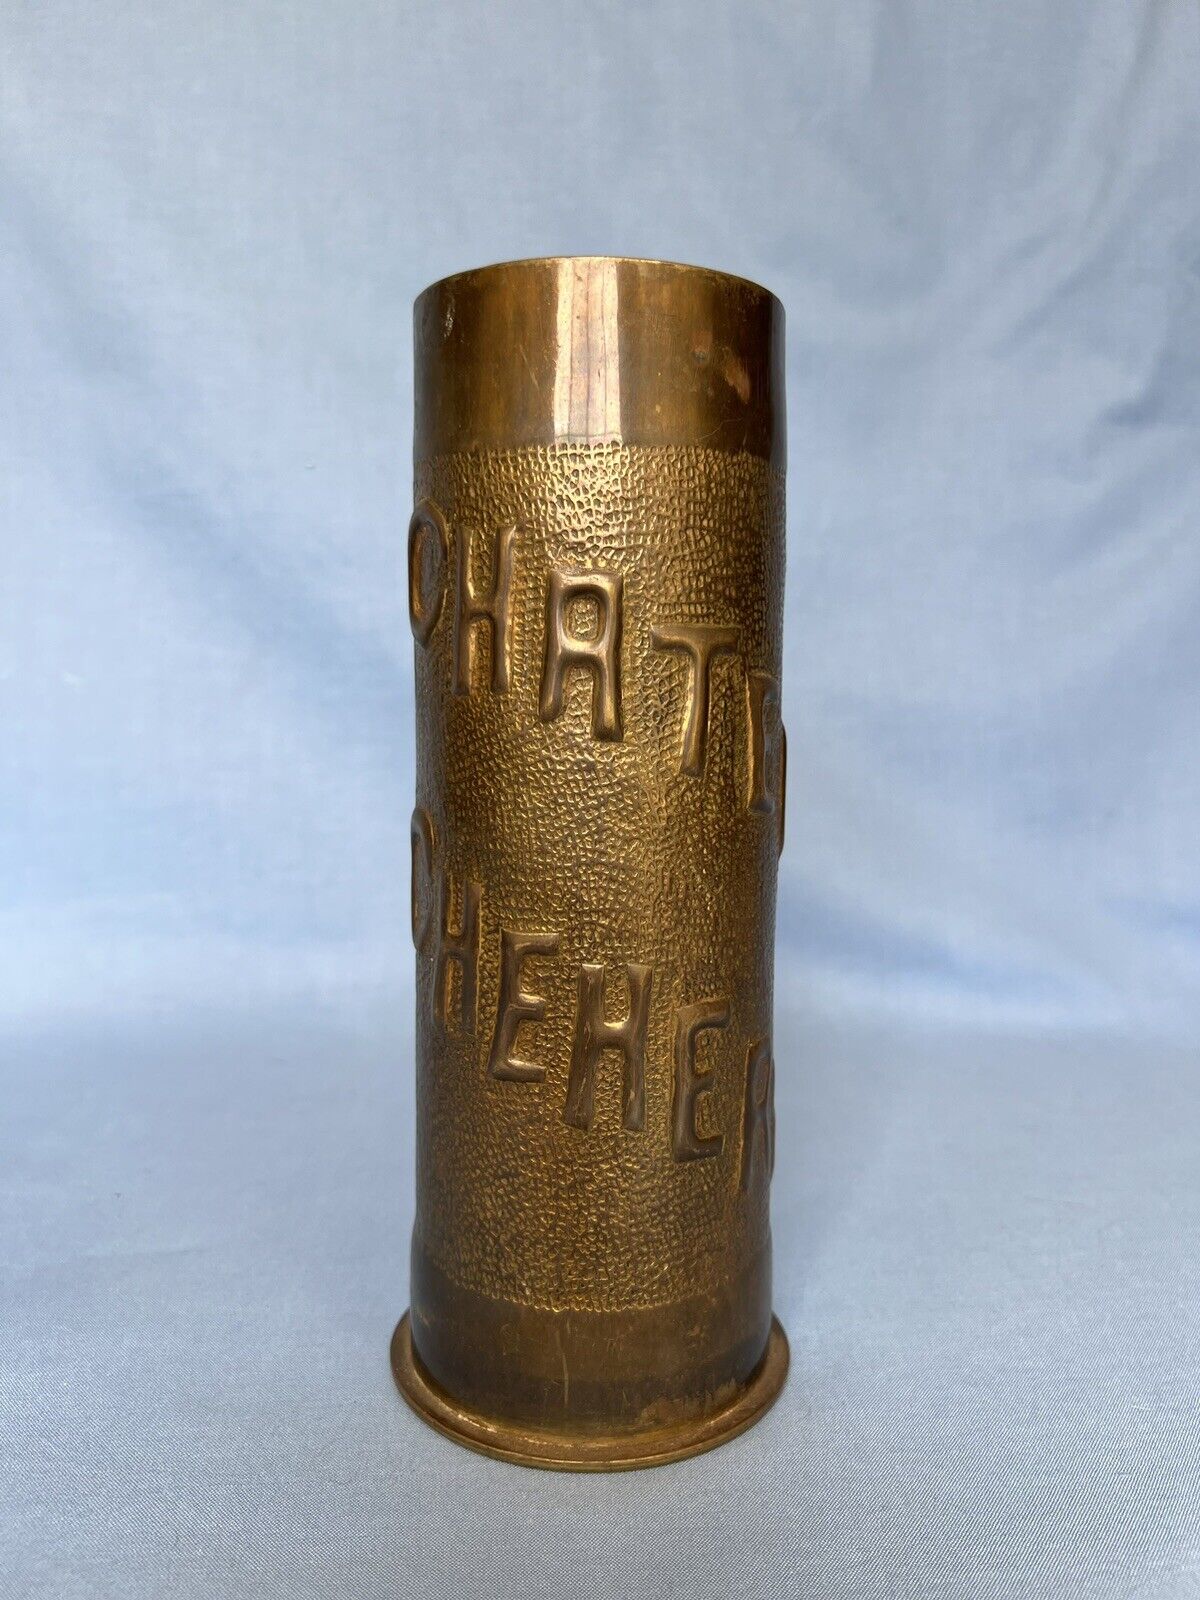 Antique WWI Trench Art Brass 1918 France CHATEL CHEHERY Meuse-Argonne Offensive